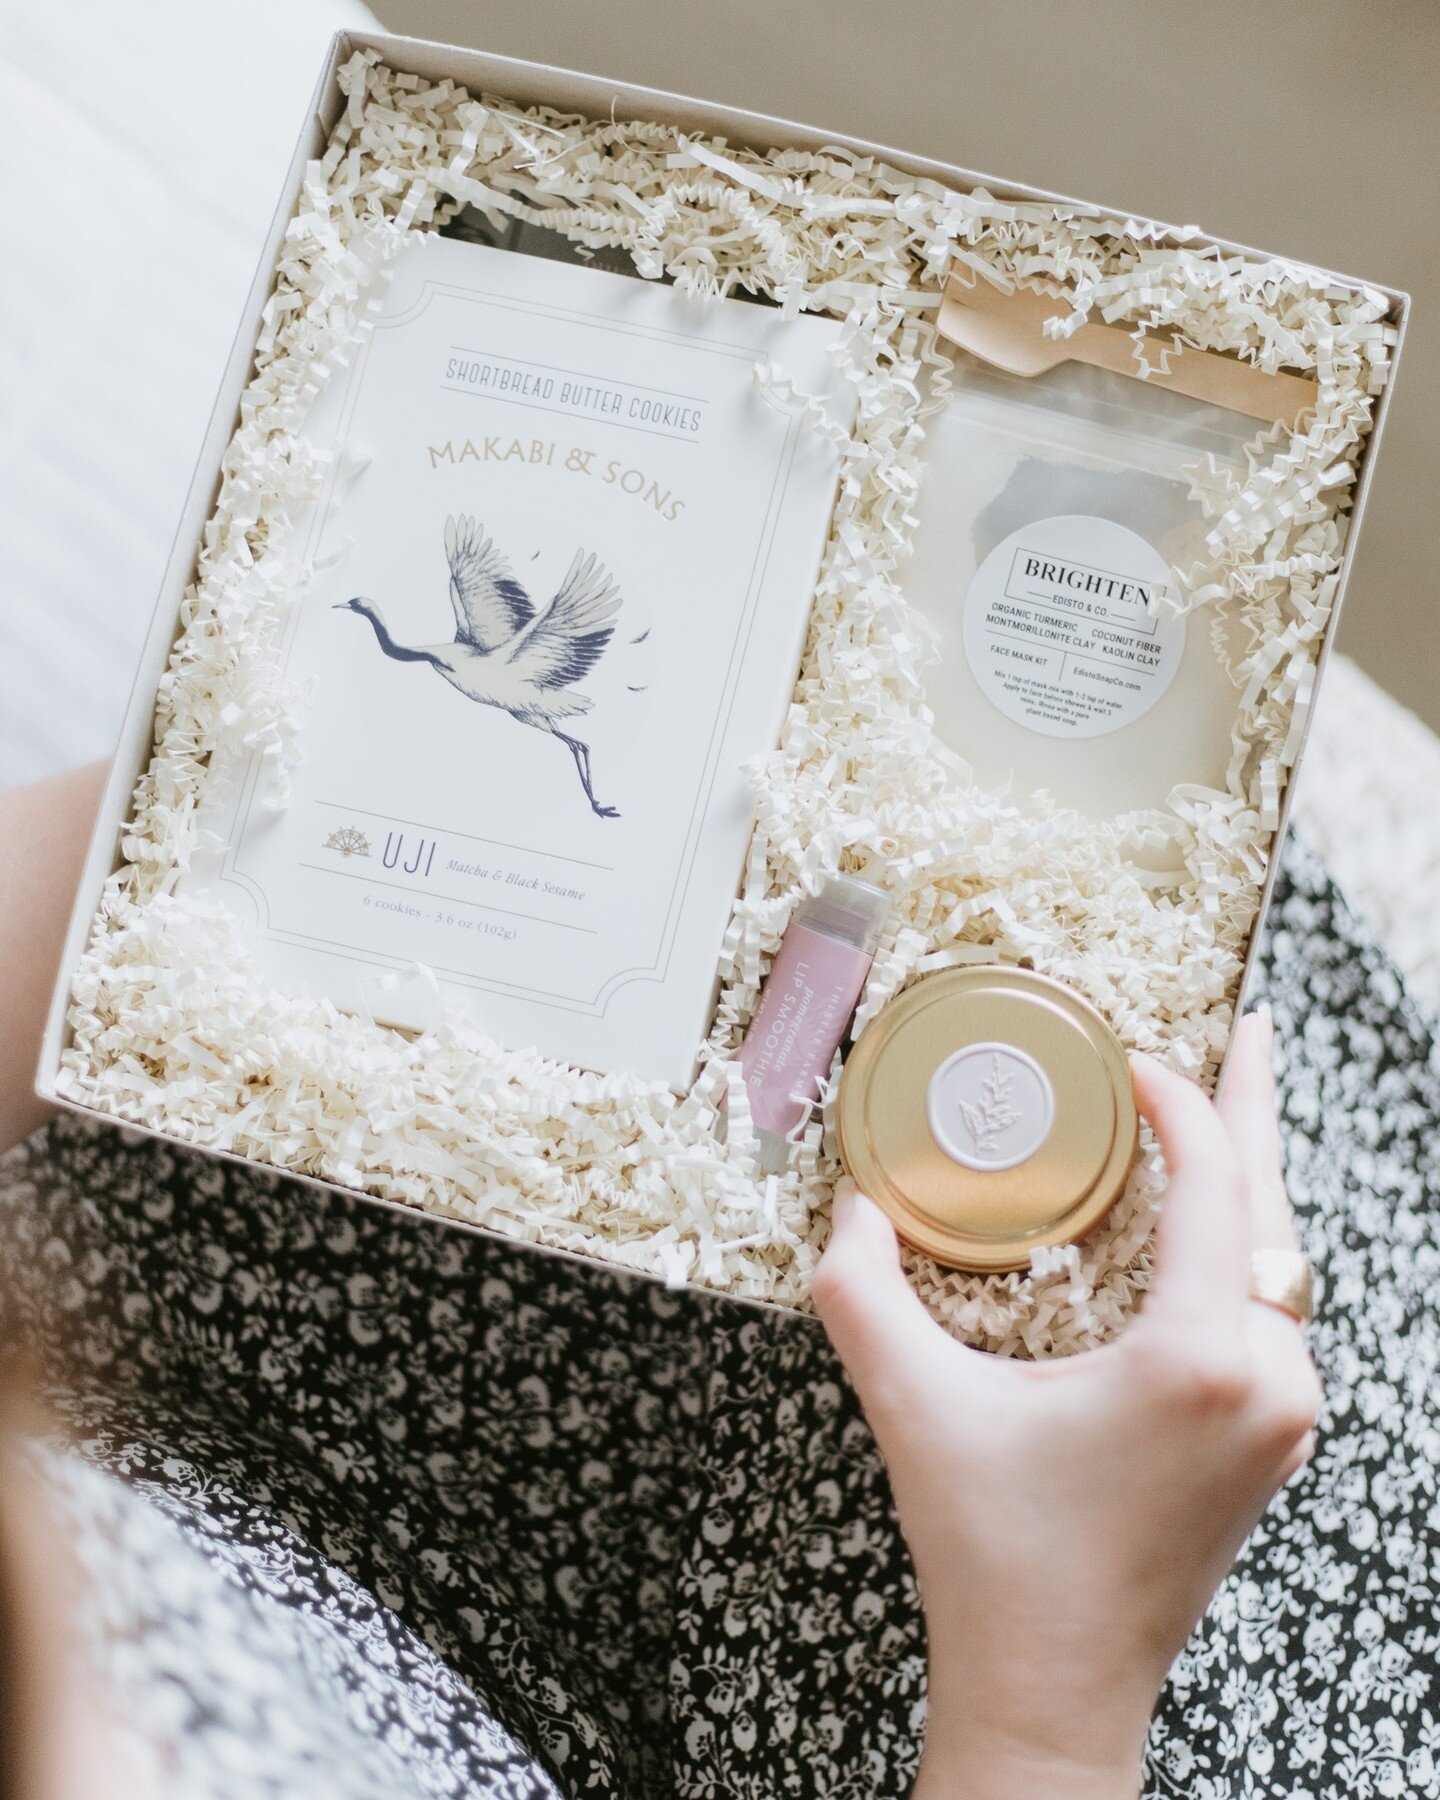 These gifts designed for client, Pure Serene, are just that! Full of blissful vibes, serene details, and artisan goods for creating moments of peace. ⁠
⁠
⁠
⁠
⁠
⁠
⁠
⁠
⁠
⁠
⁠
⁠
⁠
⁠
⁠
⁠
⁠
#BusinessGifting #CustomGifts #ClientGifts #CustomBranding #Brande